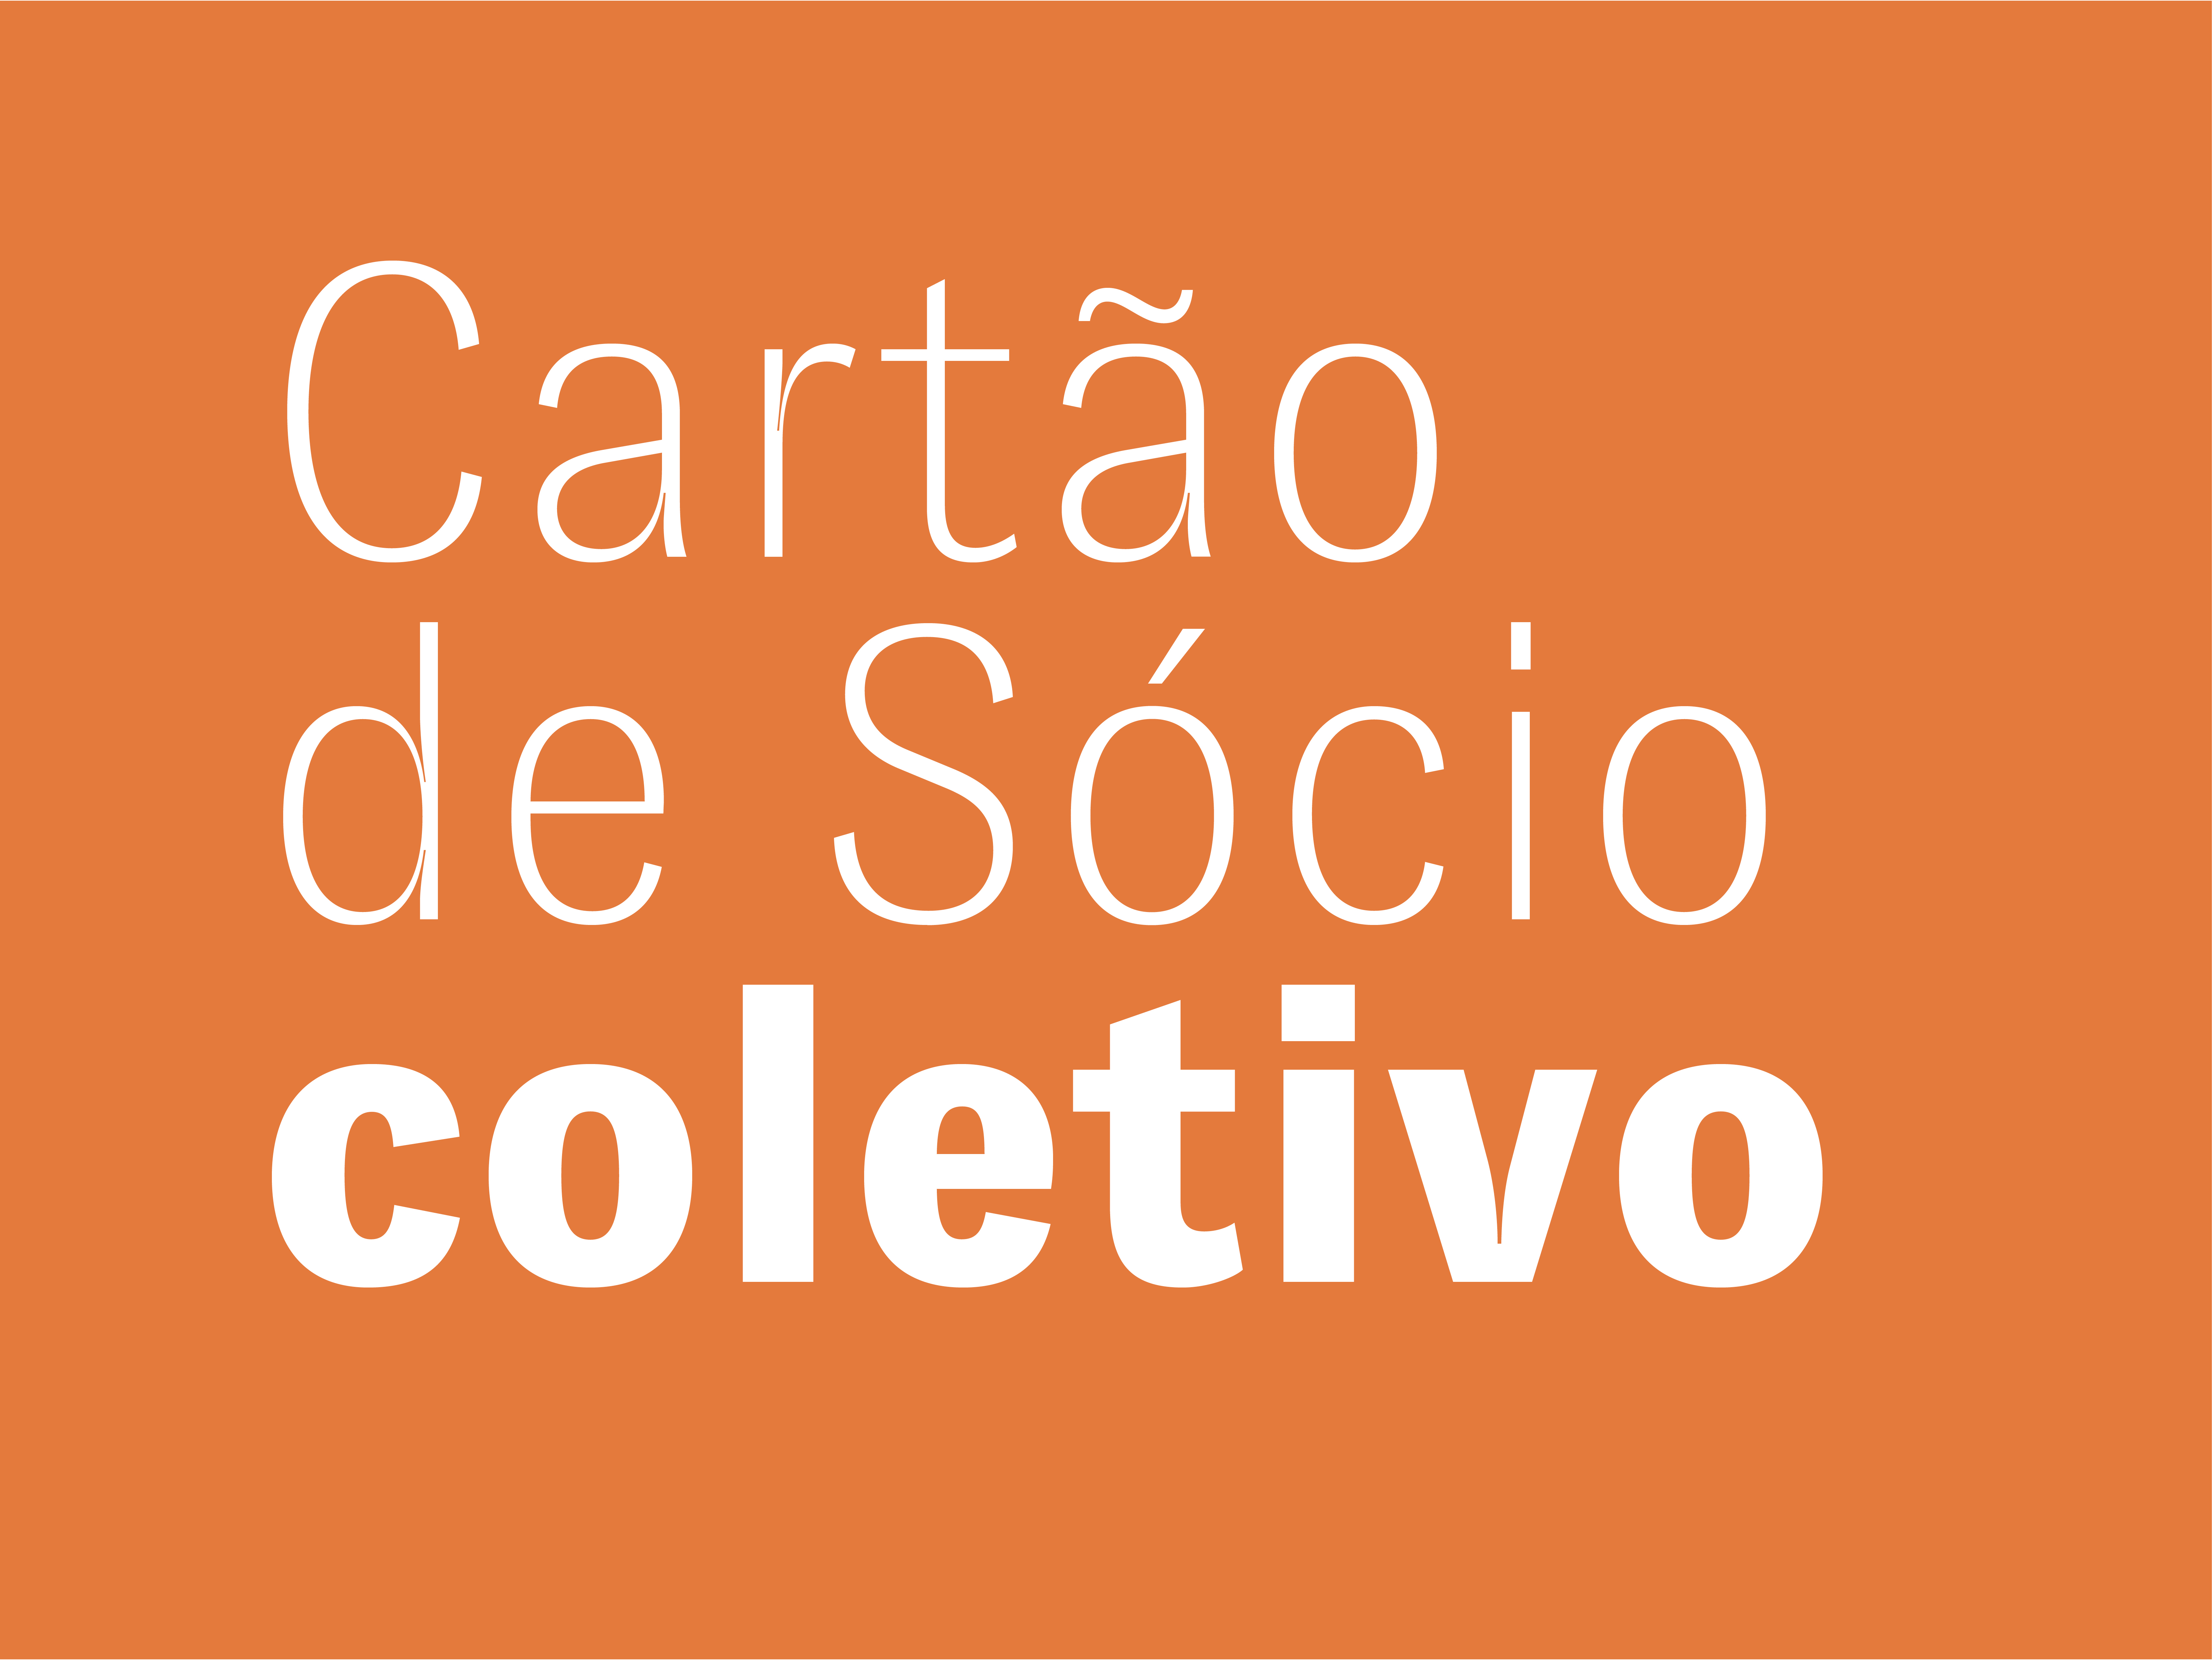 Collective - For NGOs and/or associations